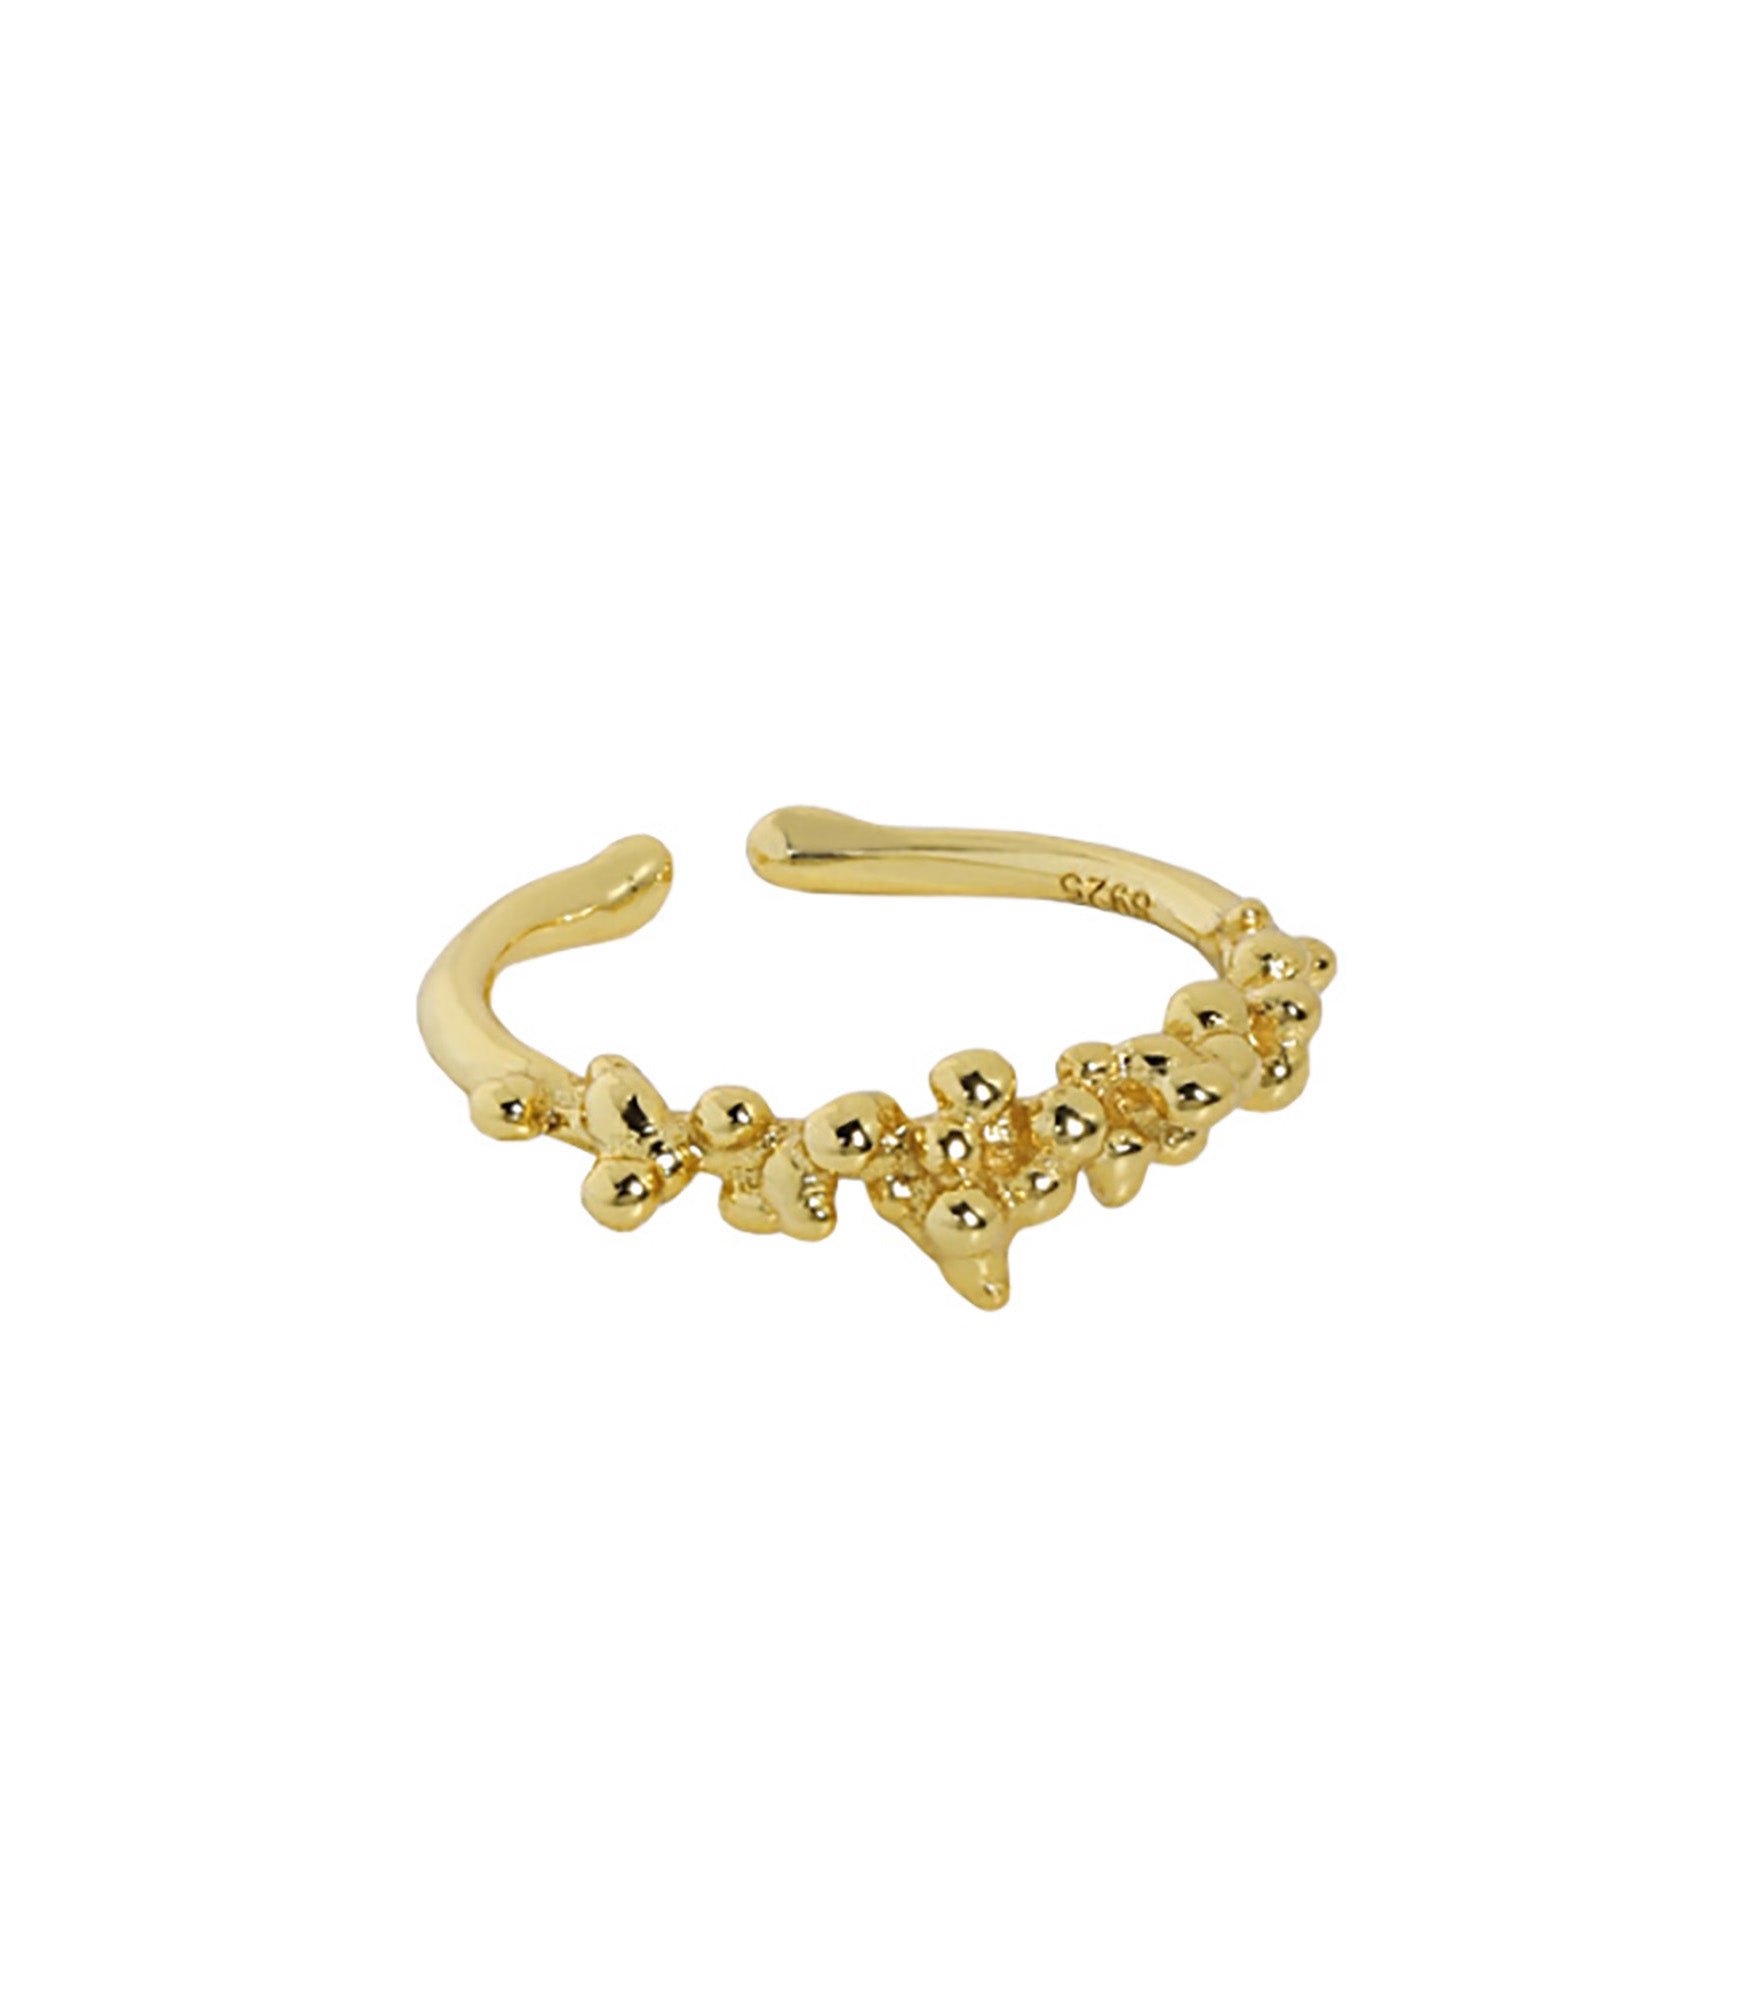 A gold vermeil ring with an open band design and bubble texture at the front.